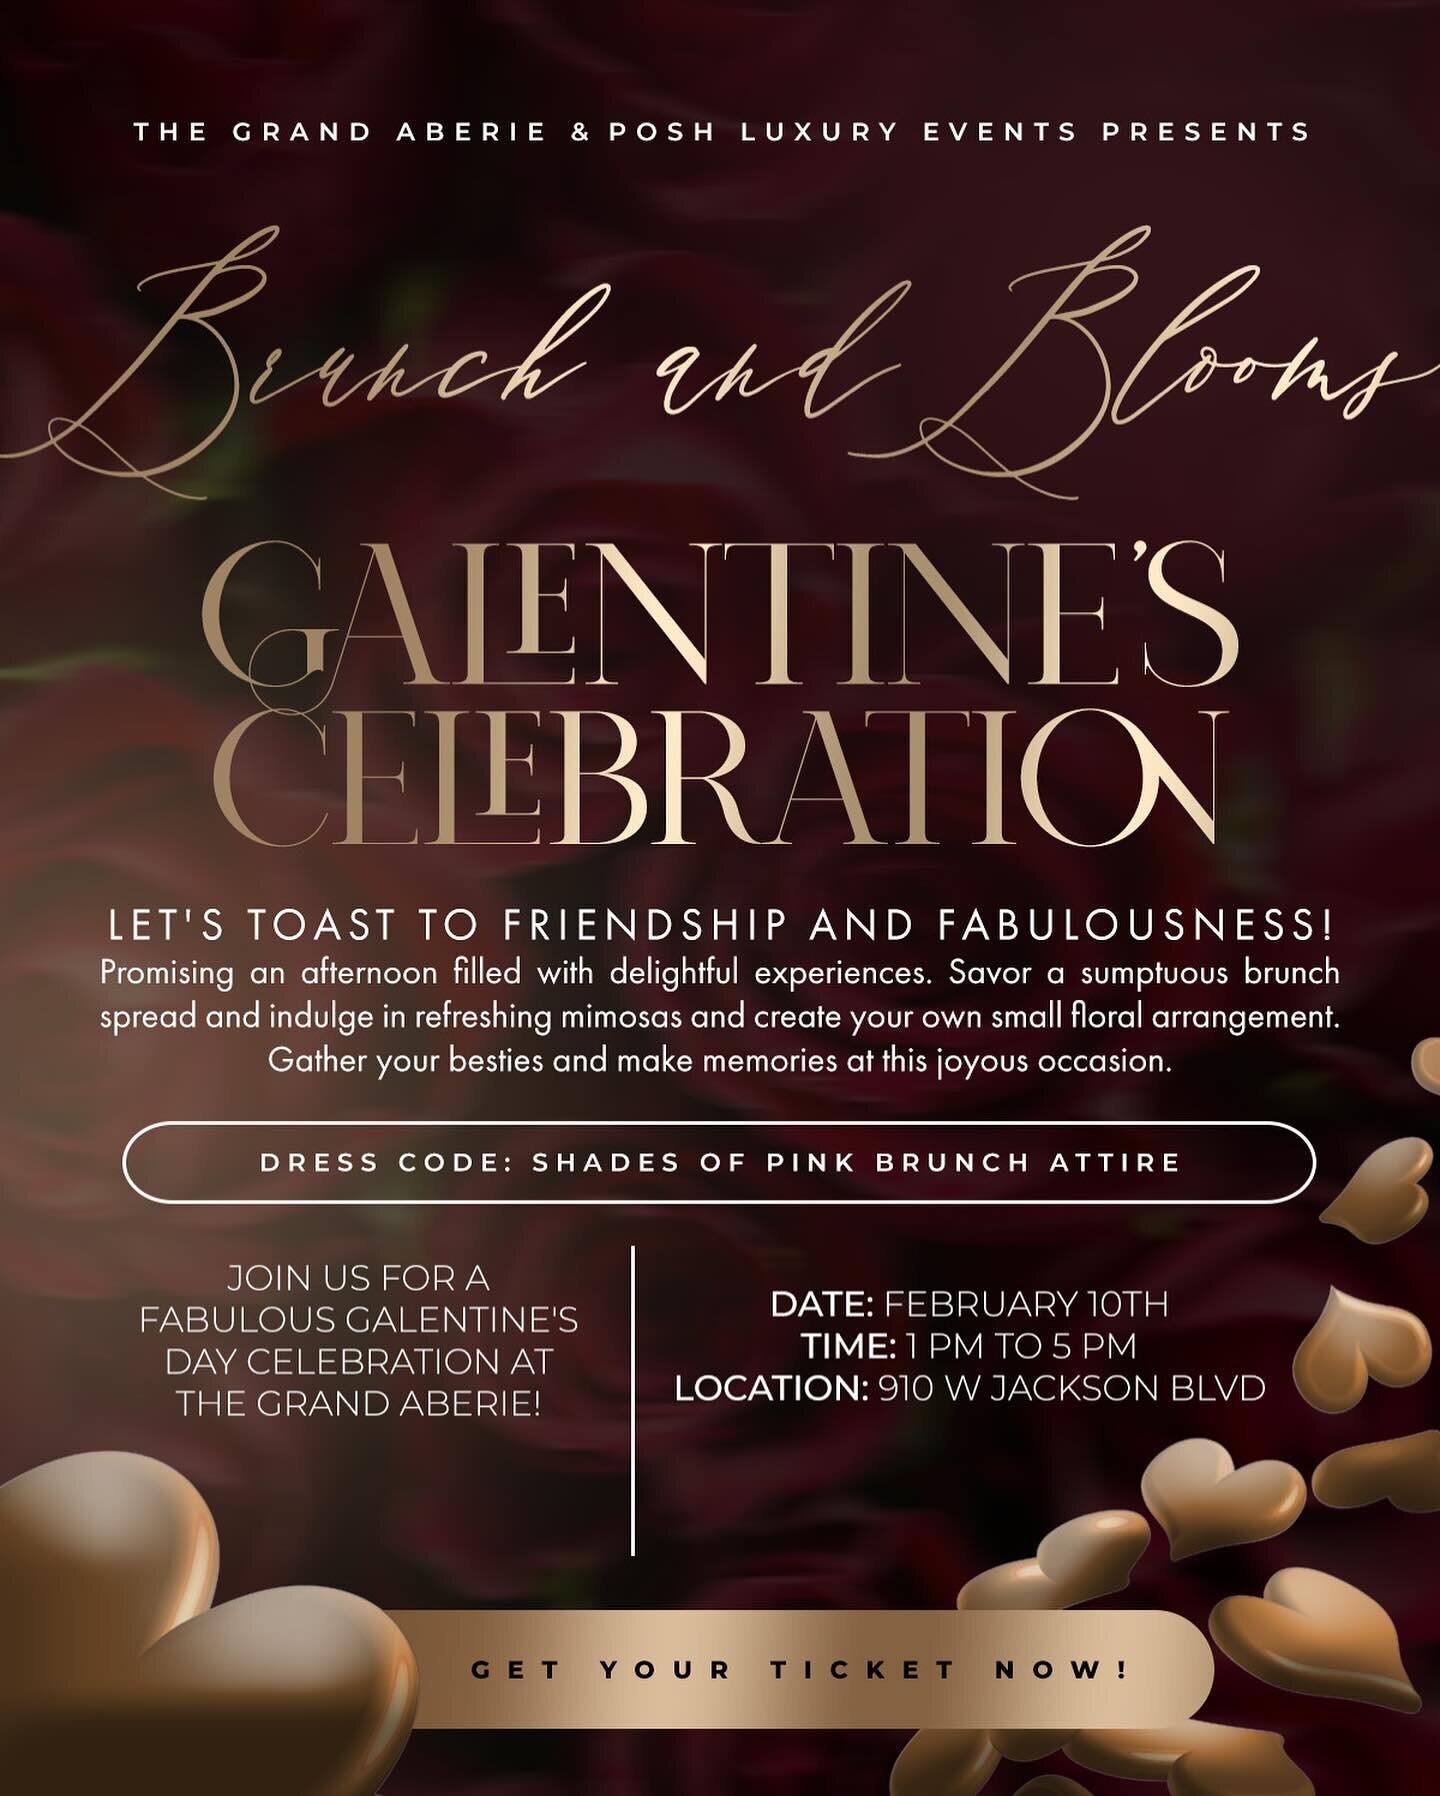 Galentine&rsquo;s Day at The Grand Aberie! Dress in Shades of Pink and join @poshluxuryevents and @thegrandaberie for &lsquo;Brunch and Blooms on Feb 10, from 1-5 PM. Savor brunch, sip mimosas, vibe to music, create a small floral arrangement and so 